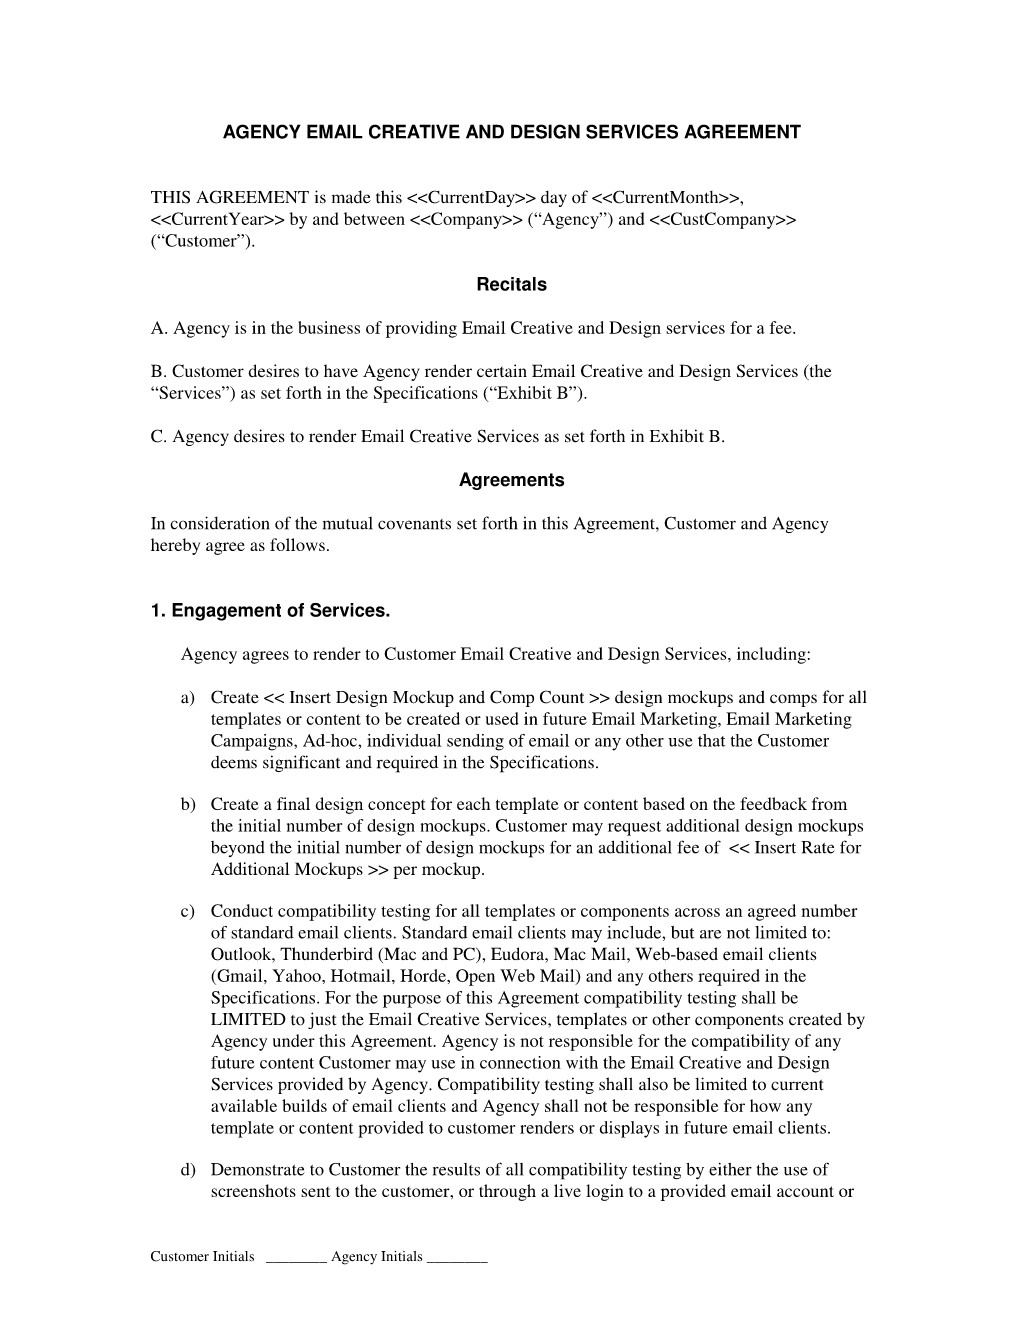 Email Marketing Creative By Agency Agreement Advertising And Document Contract Template